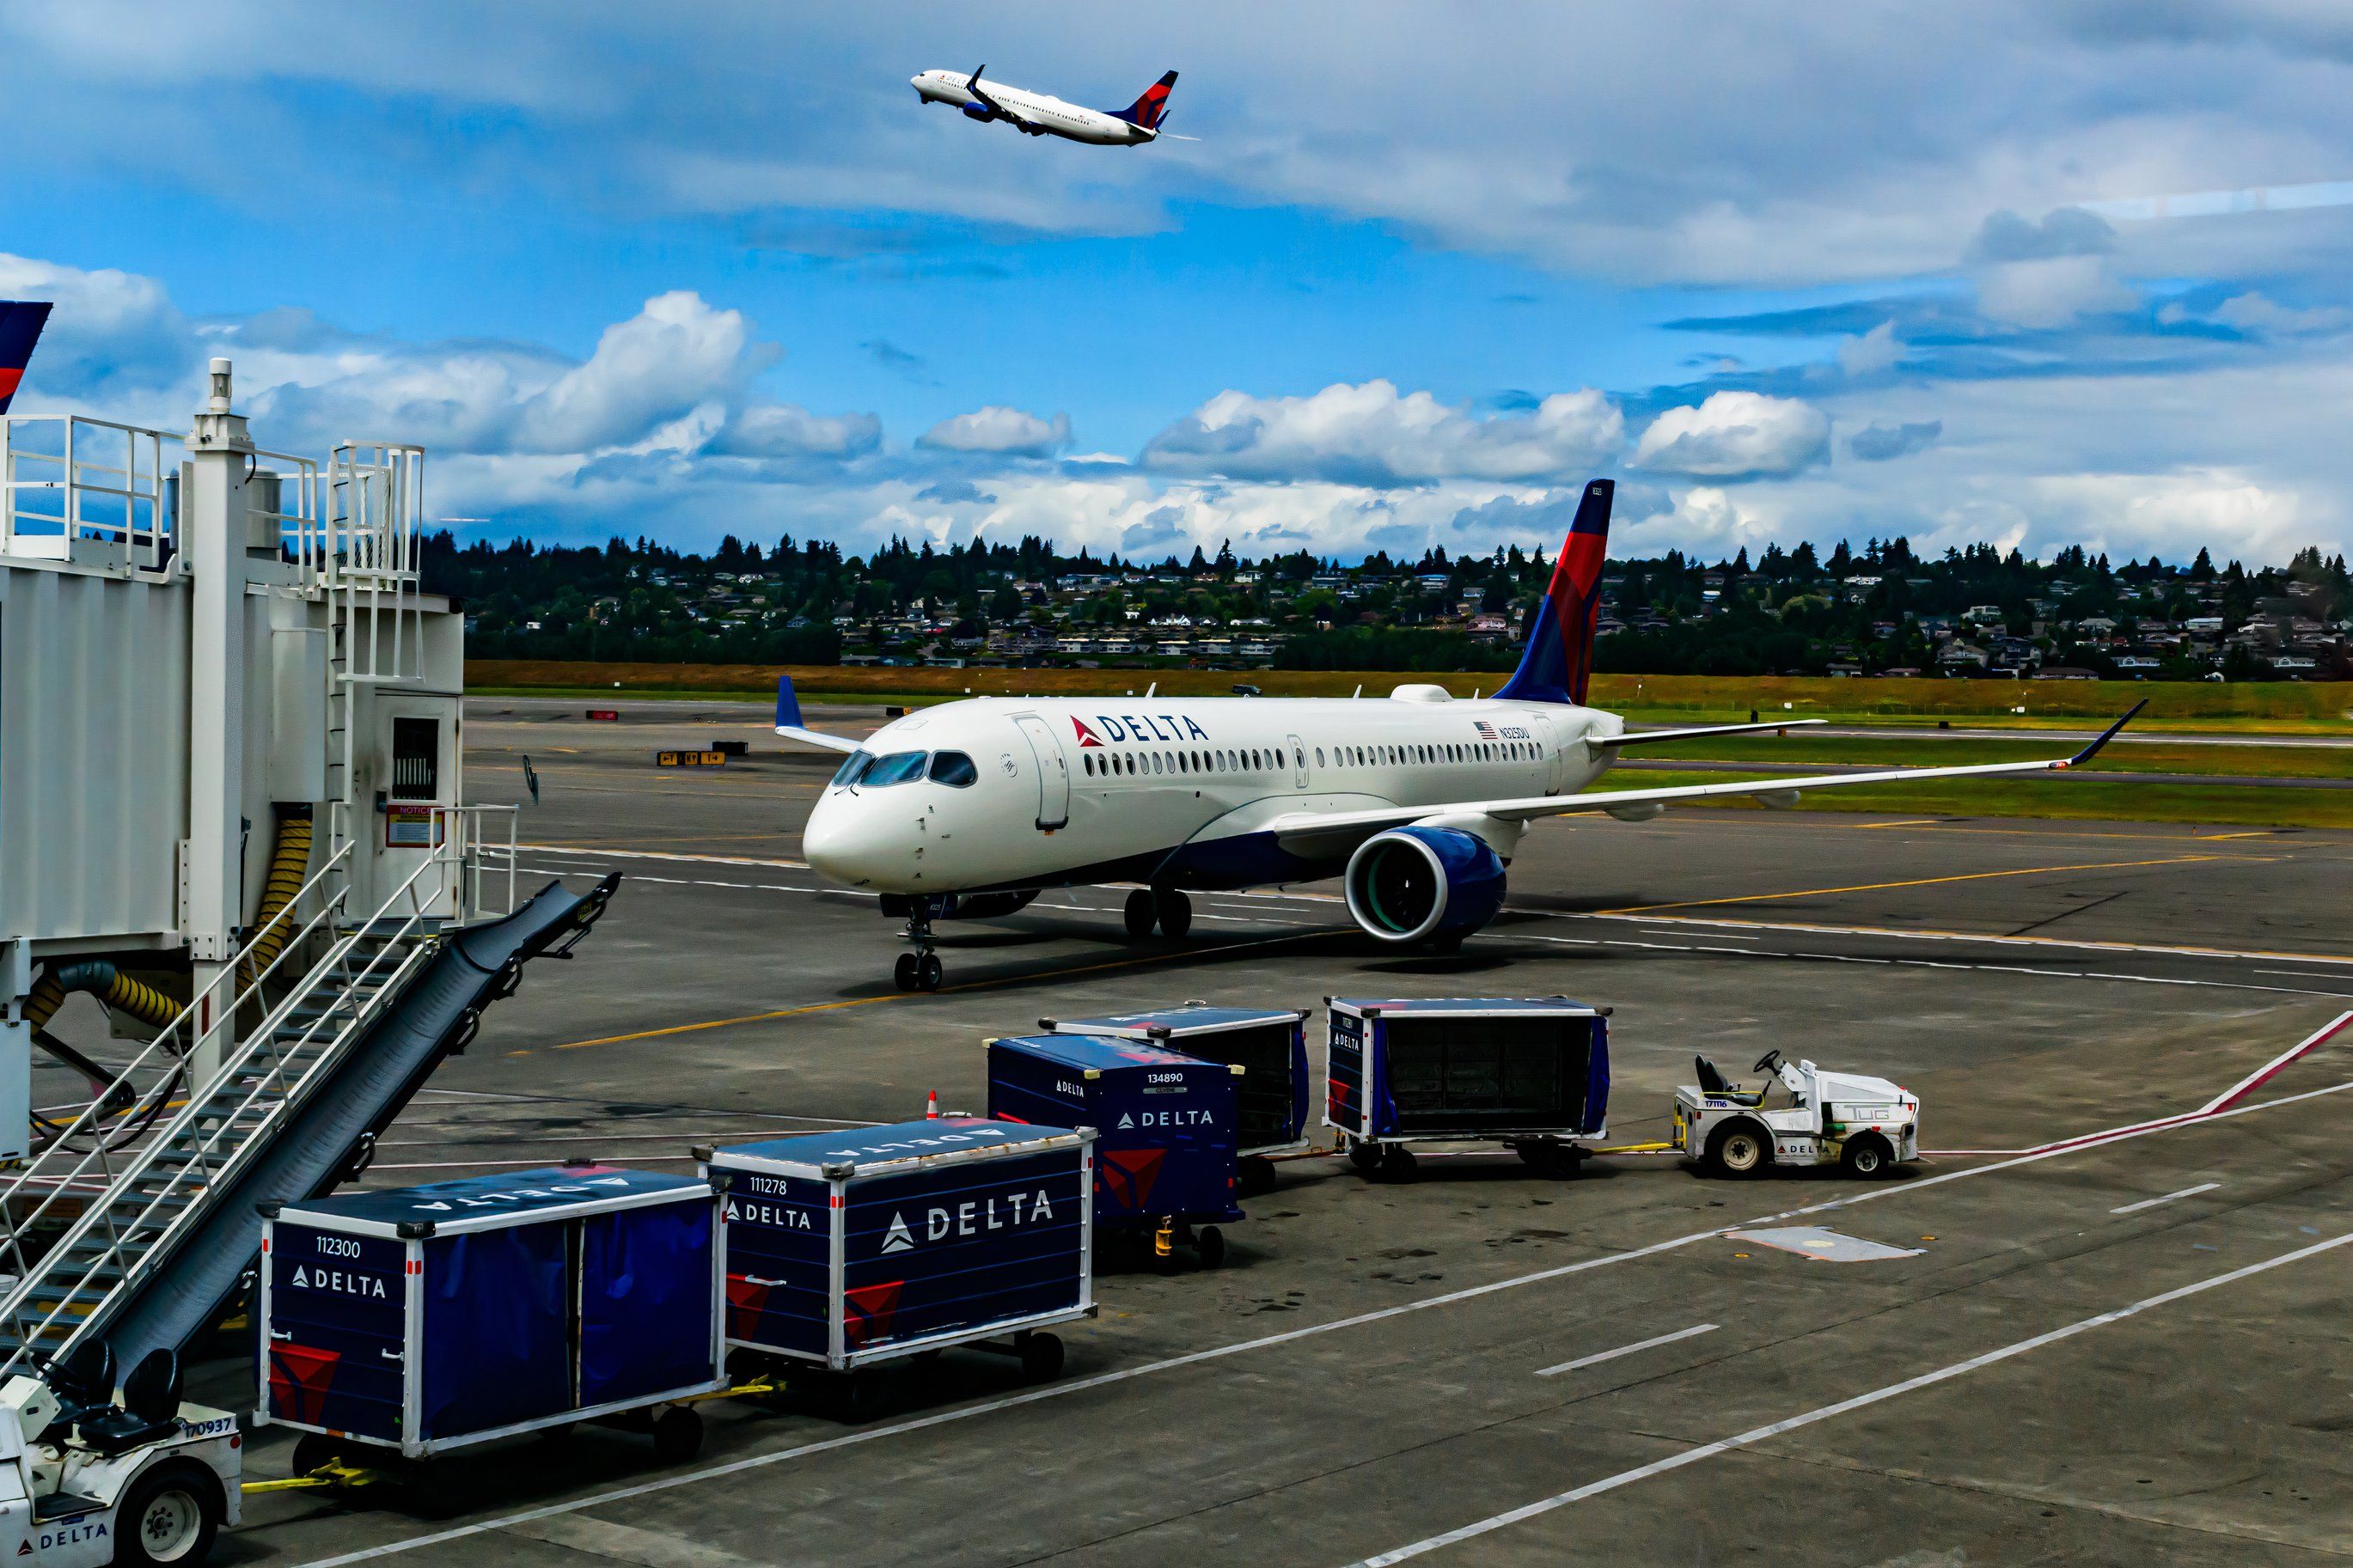 SF_Delta A220-300 Pulling In While 737 Rises From PDX  4x6_JAK-1